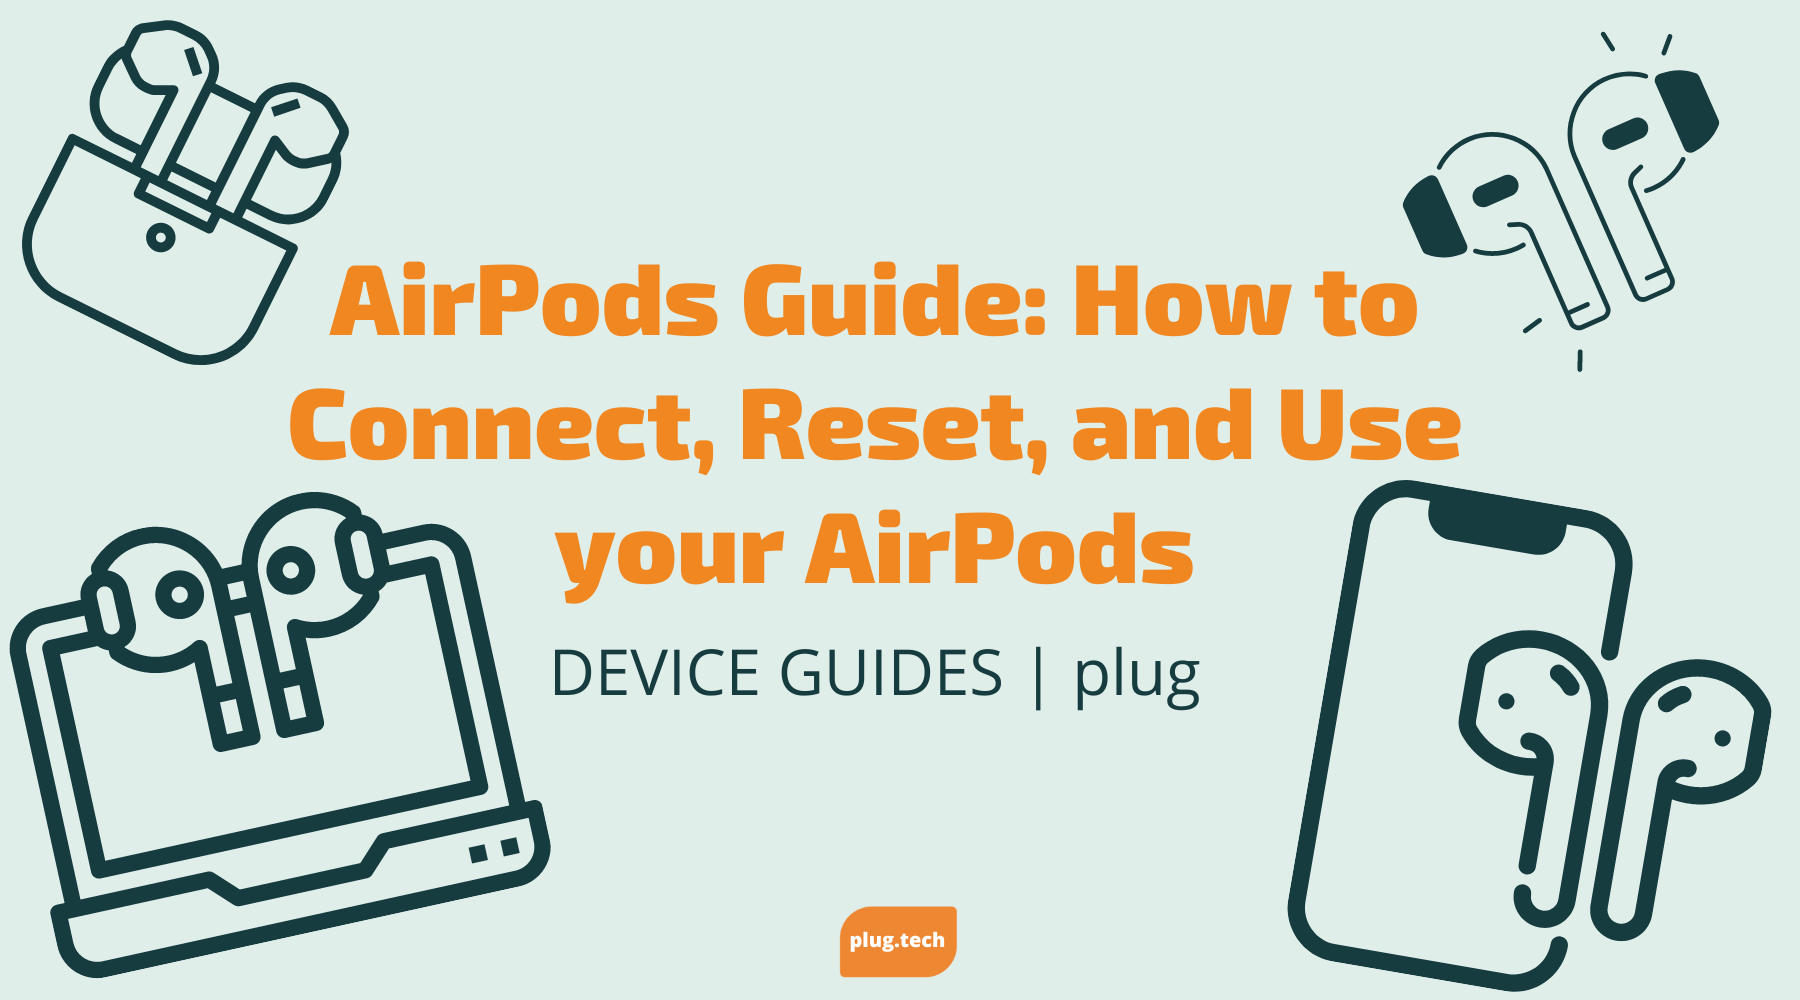 AirPods Guide: How to Connect, Reset, and Use your AirPods